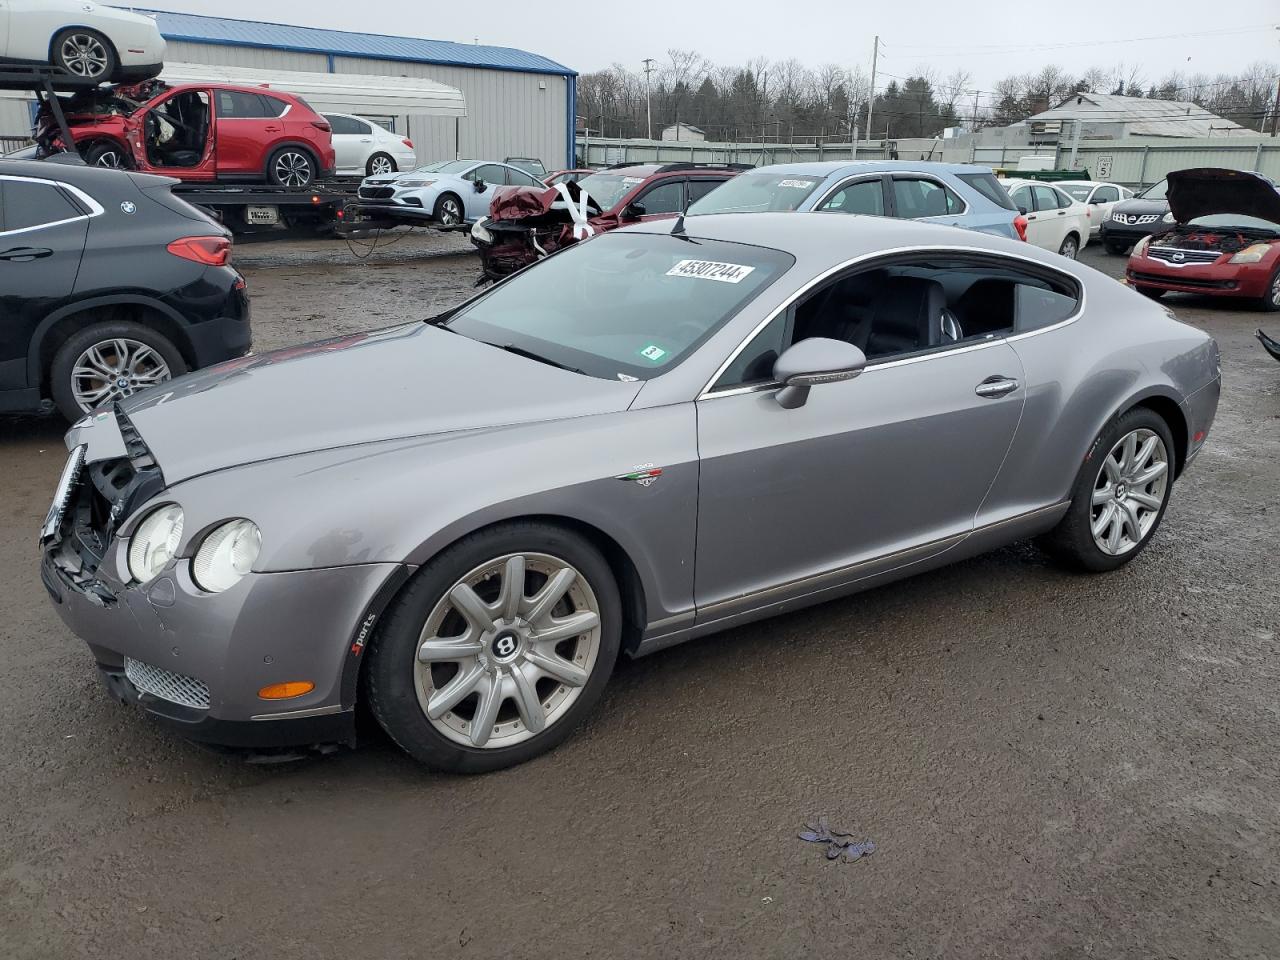 vin: SCBCR63W25C025397 SCBCR63W25C025397 2005 bentley continental 6000 for Sale in 18073 2303, Pa - Philadelphia, Pennsburg, USA